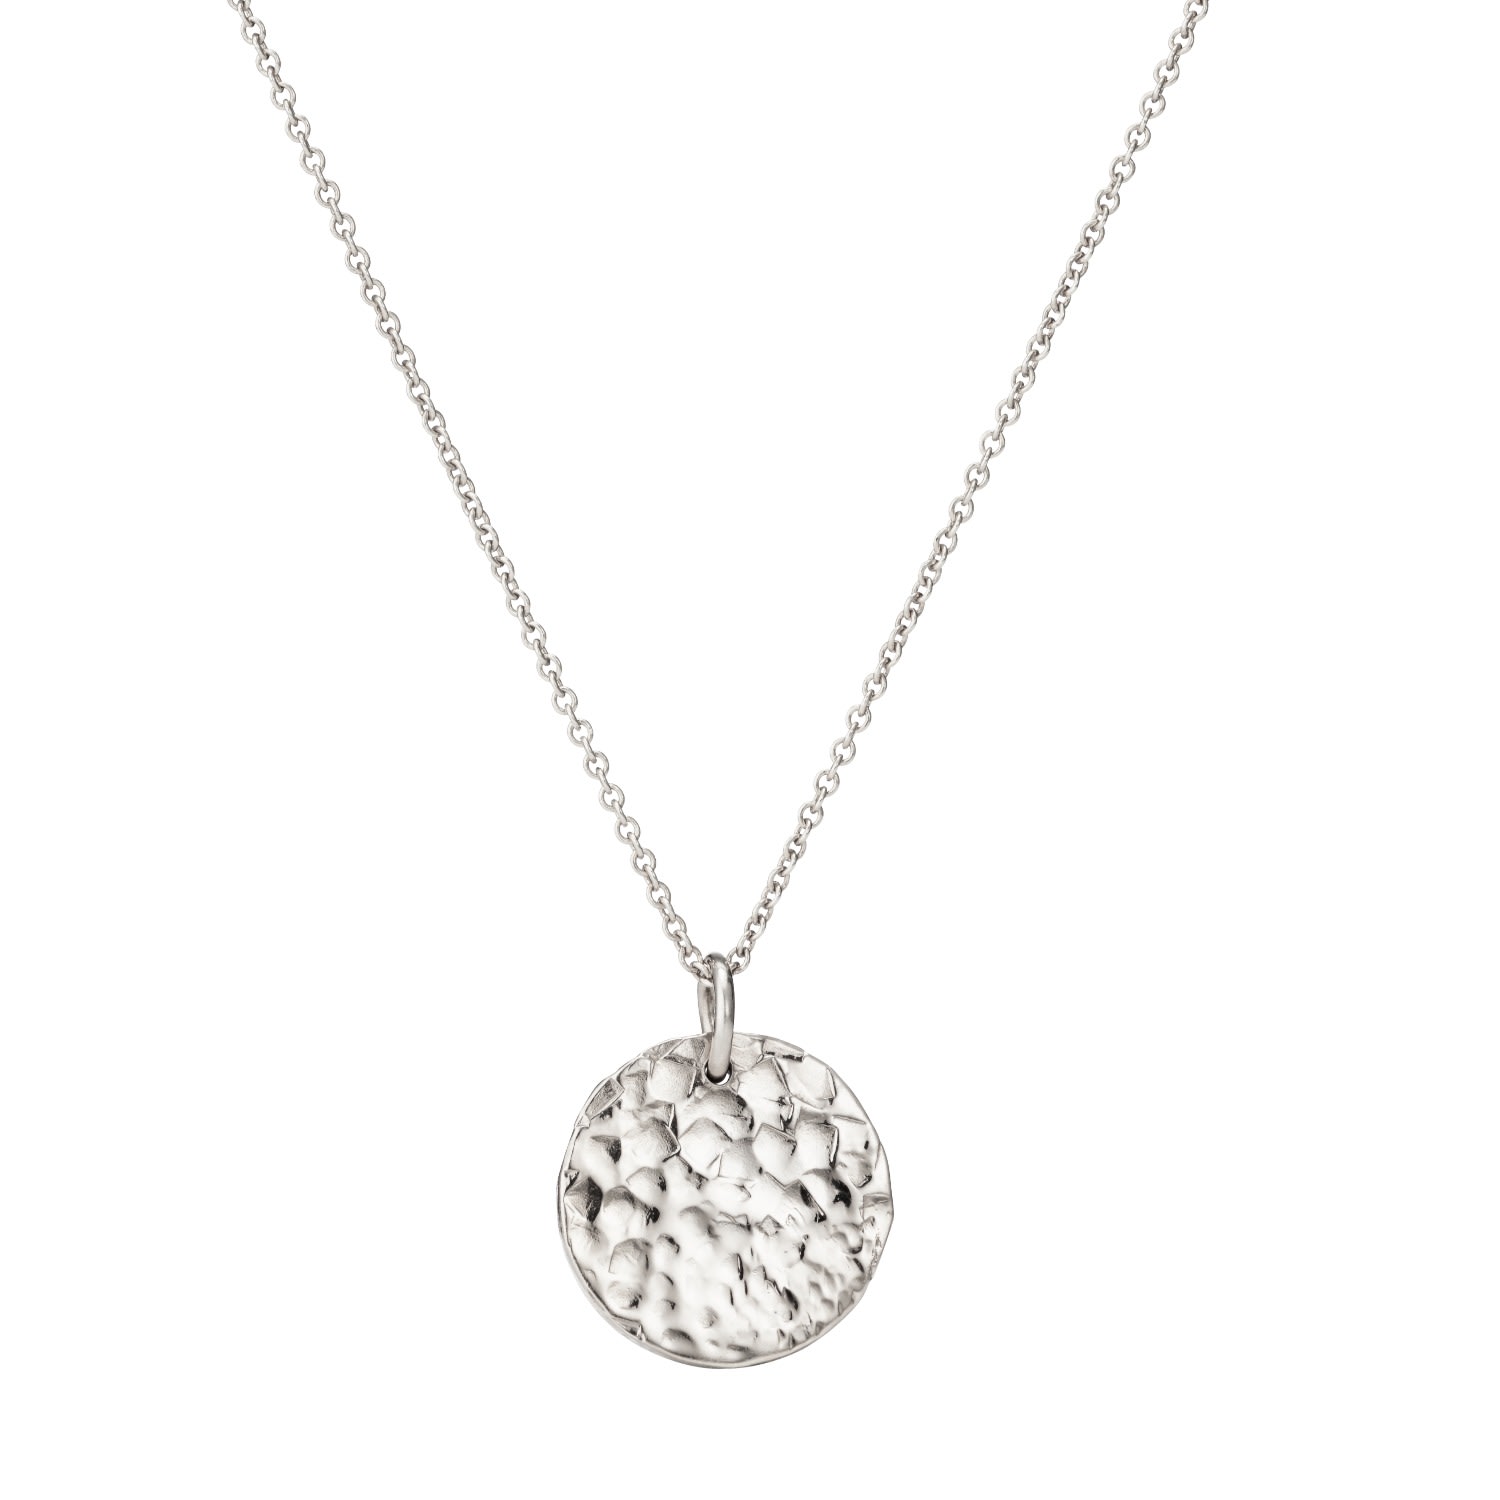 Women’s Sterling Silver Textured Disc Necklace Posh Totty Designs